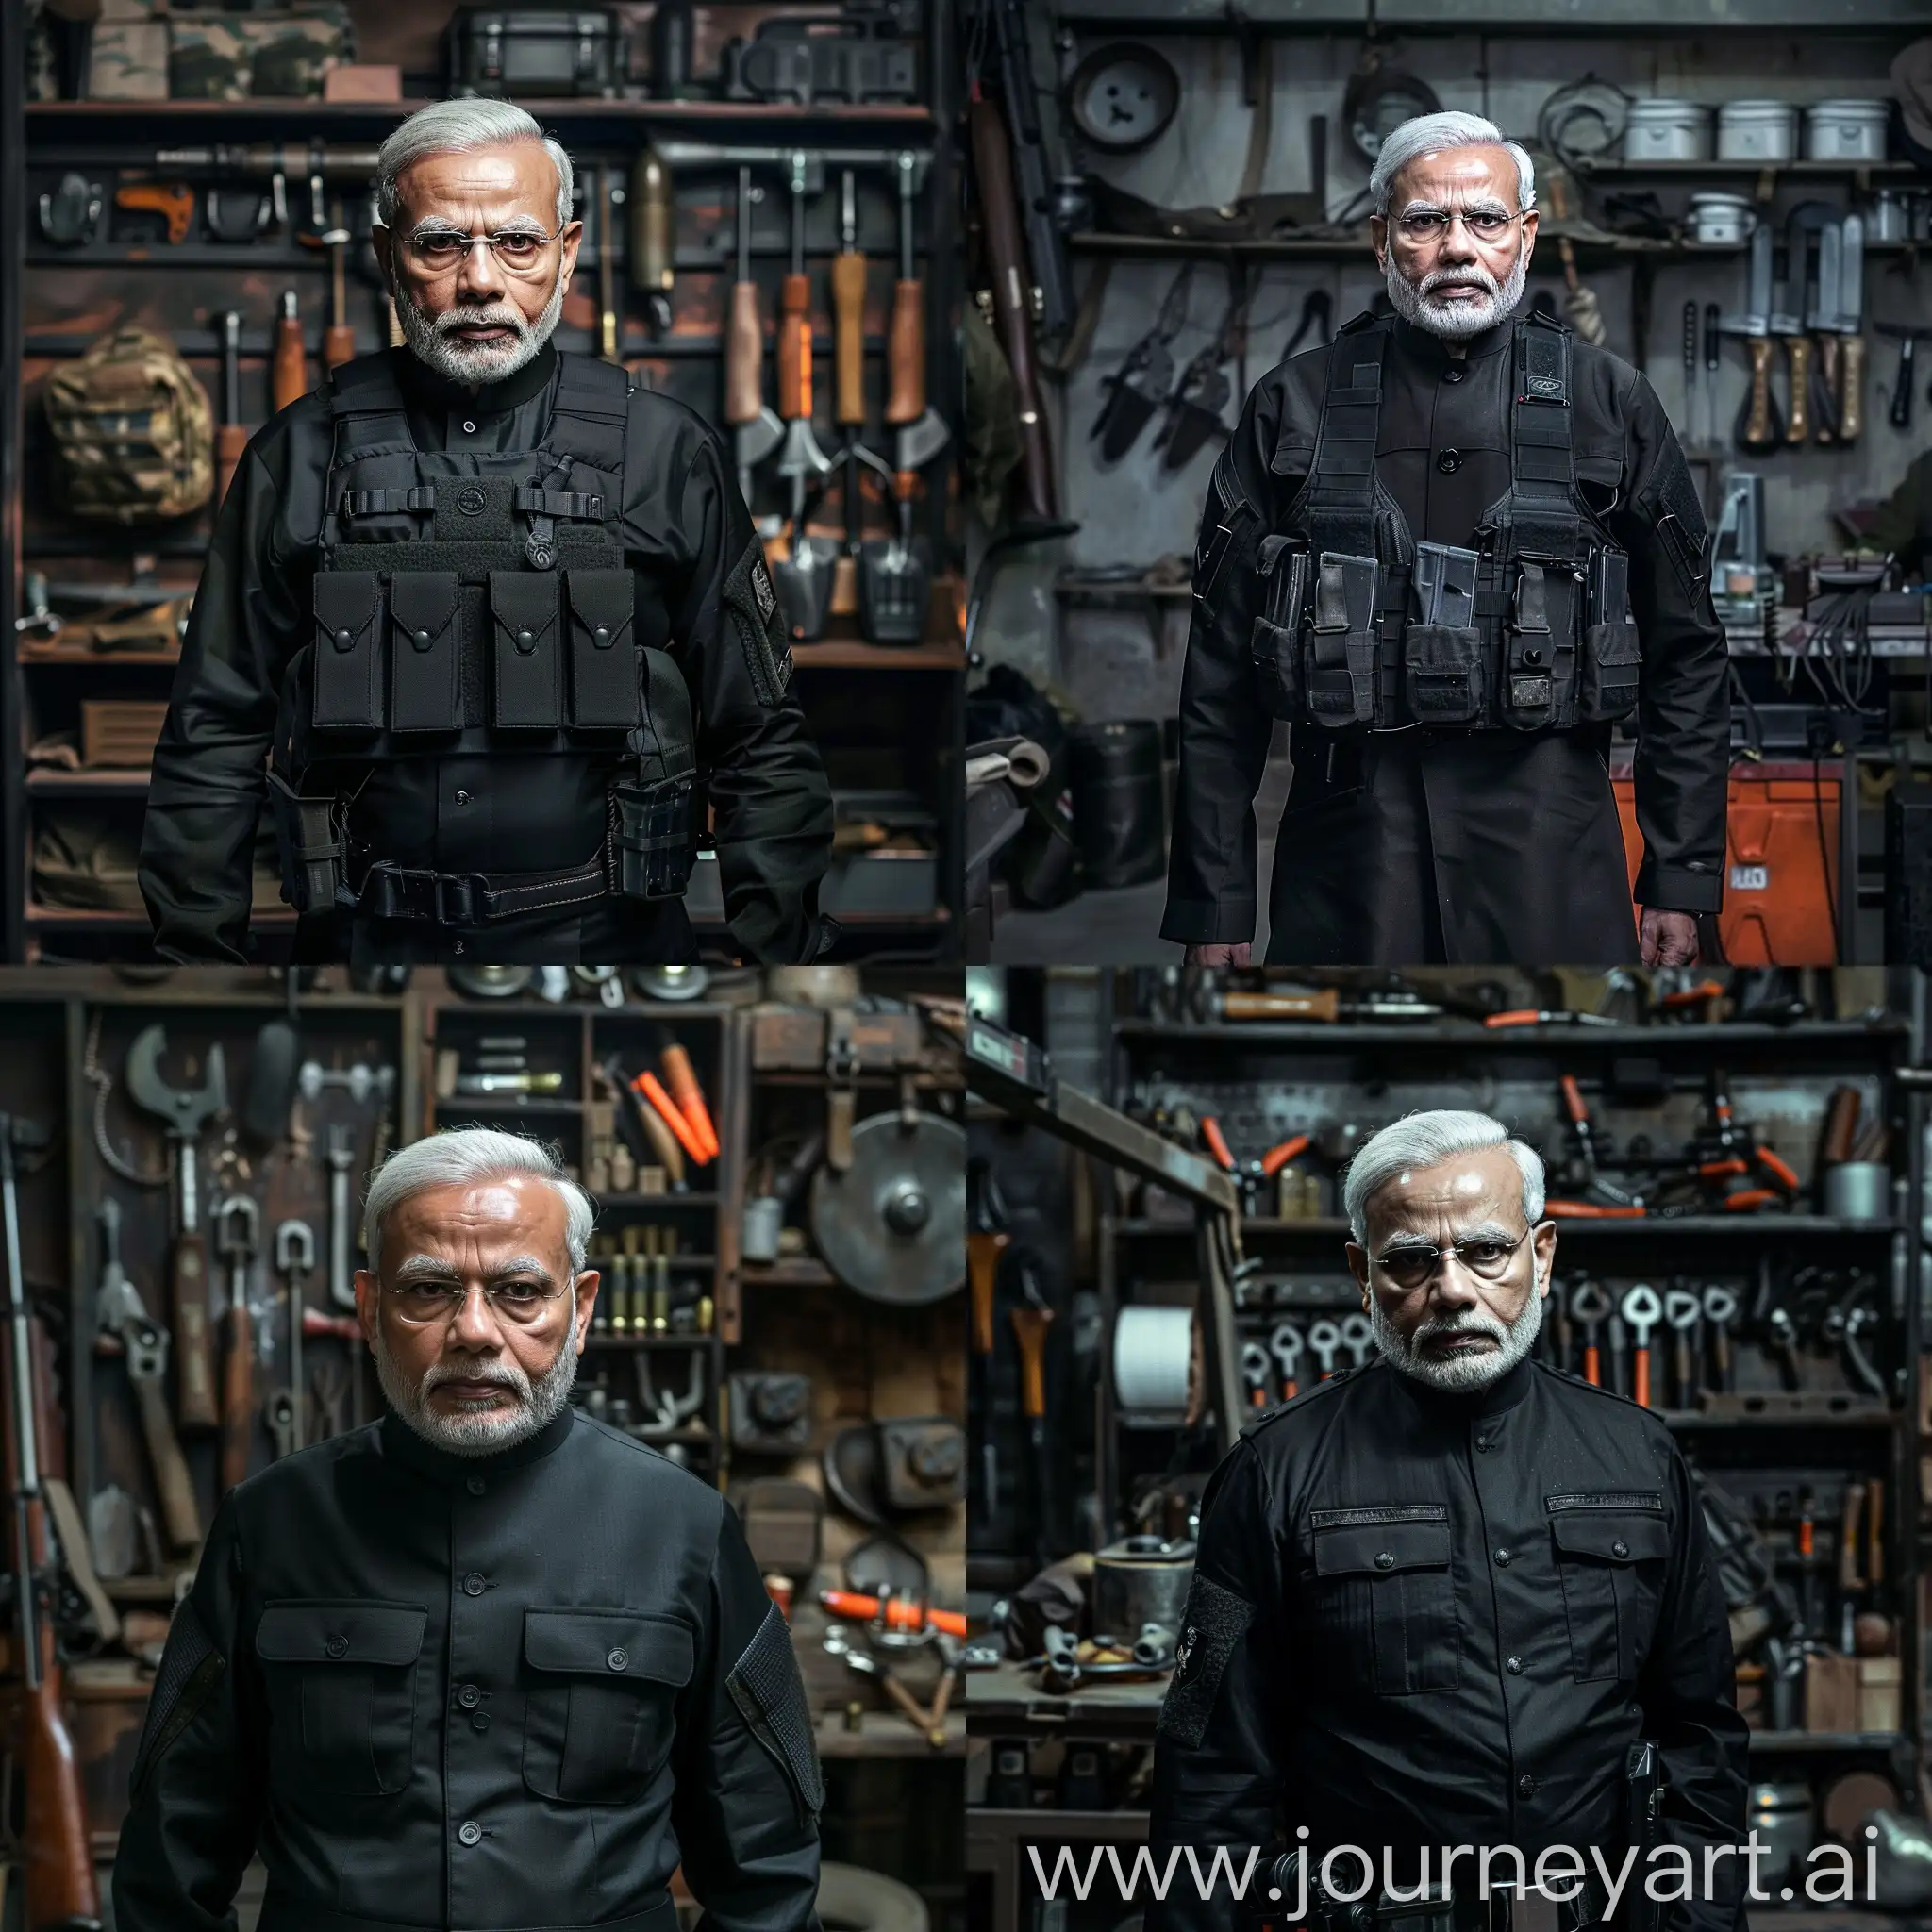 Narendra modi in black commando uniform with a lot of combat tools in the background